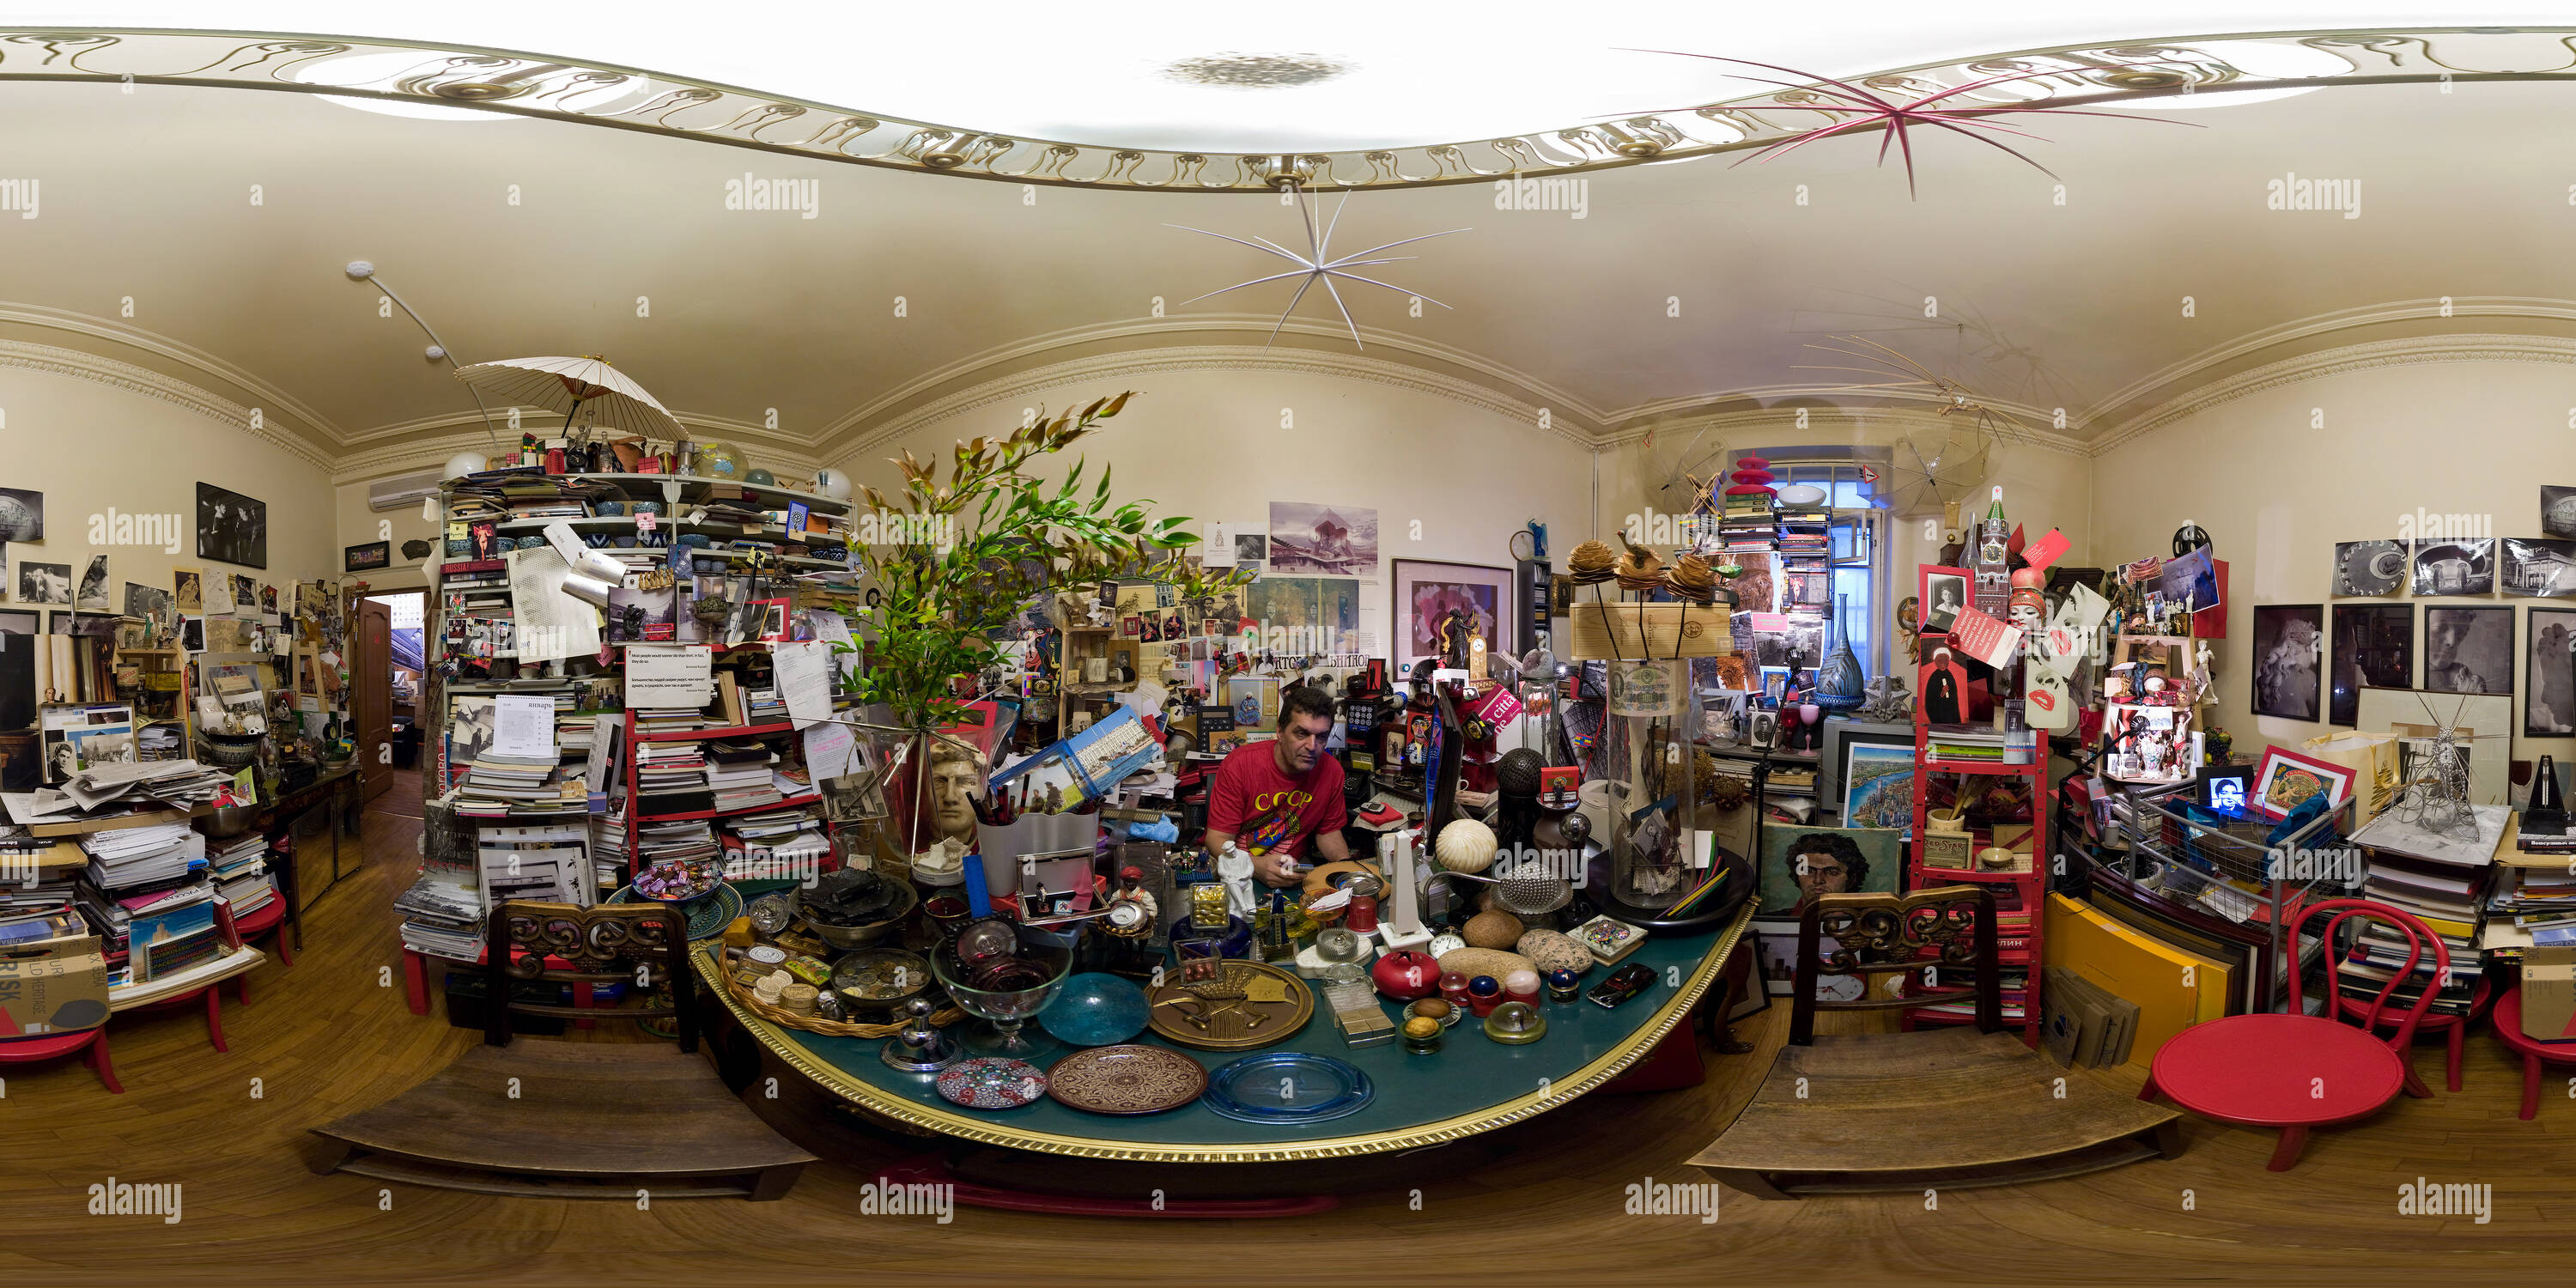 360 degree panoramic view of David Sarkisyan, the Director of MUAR and his private office.